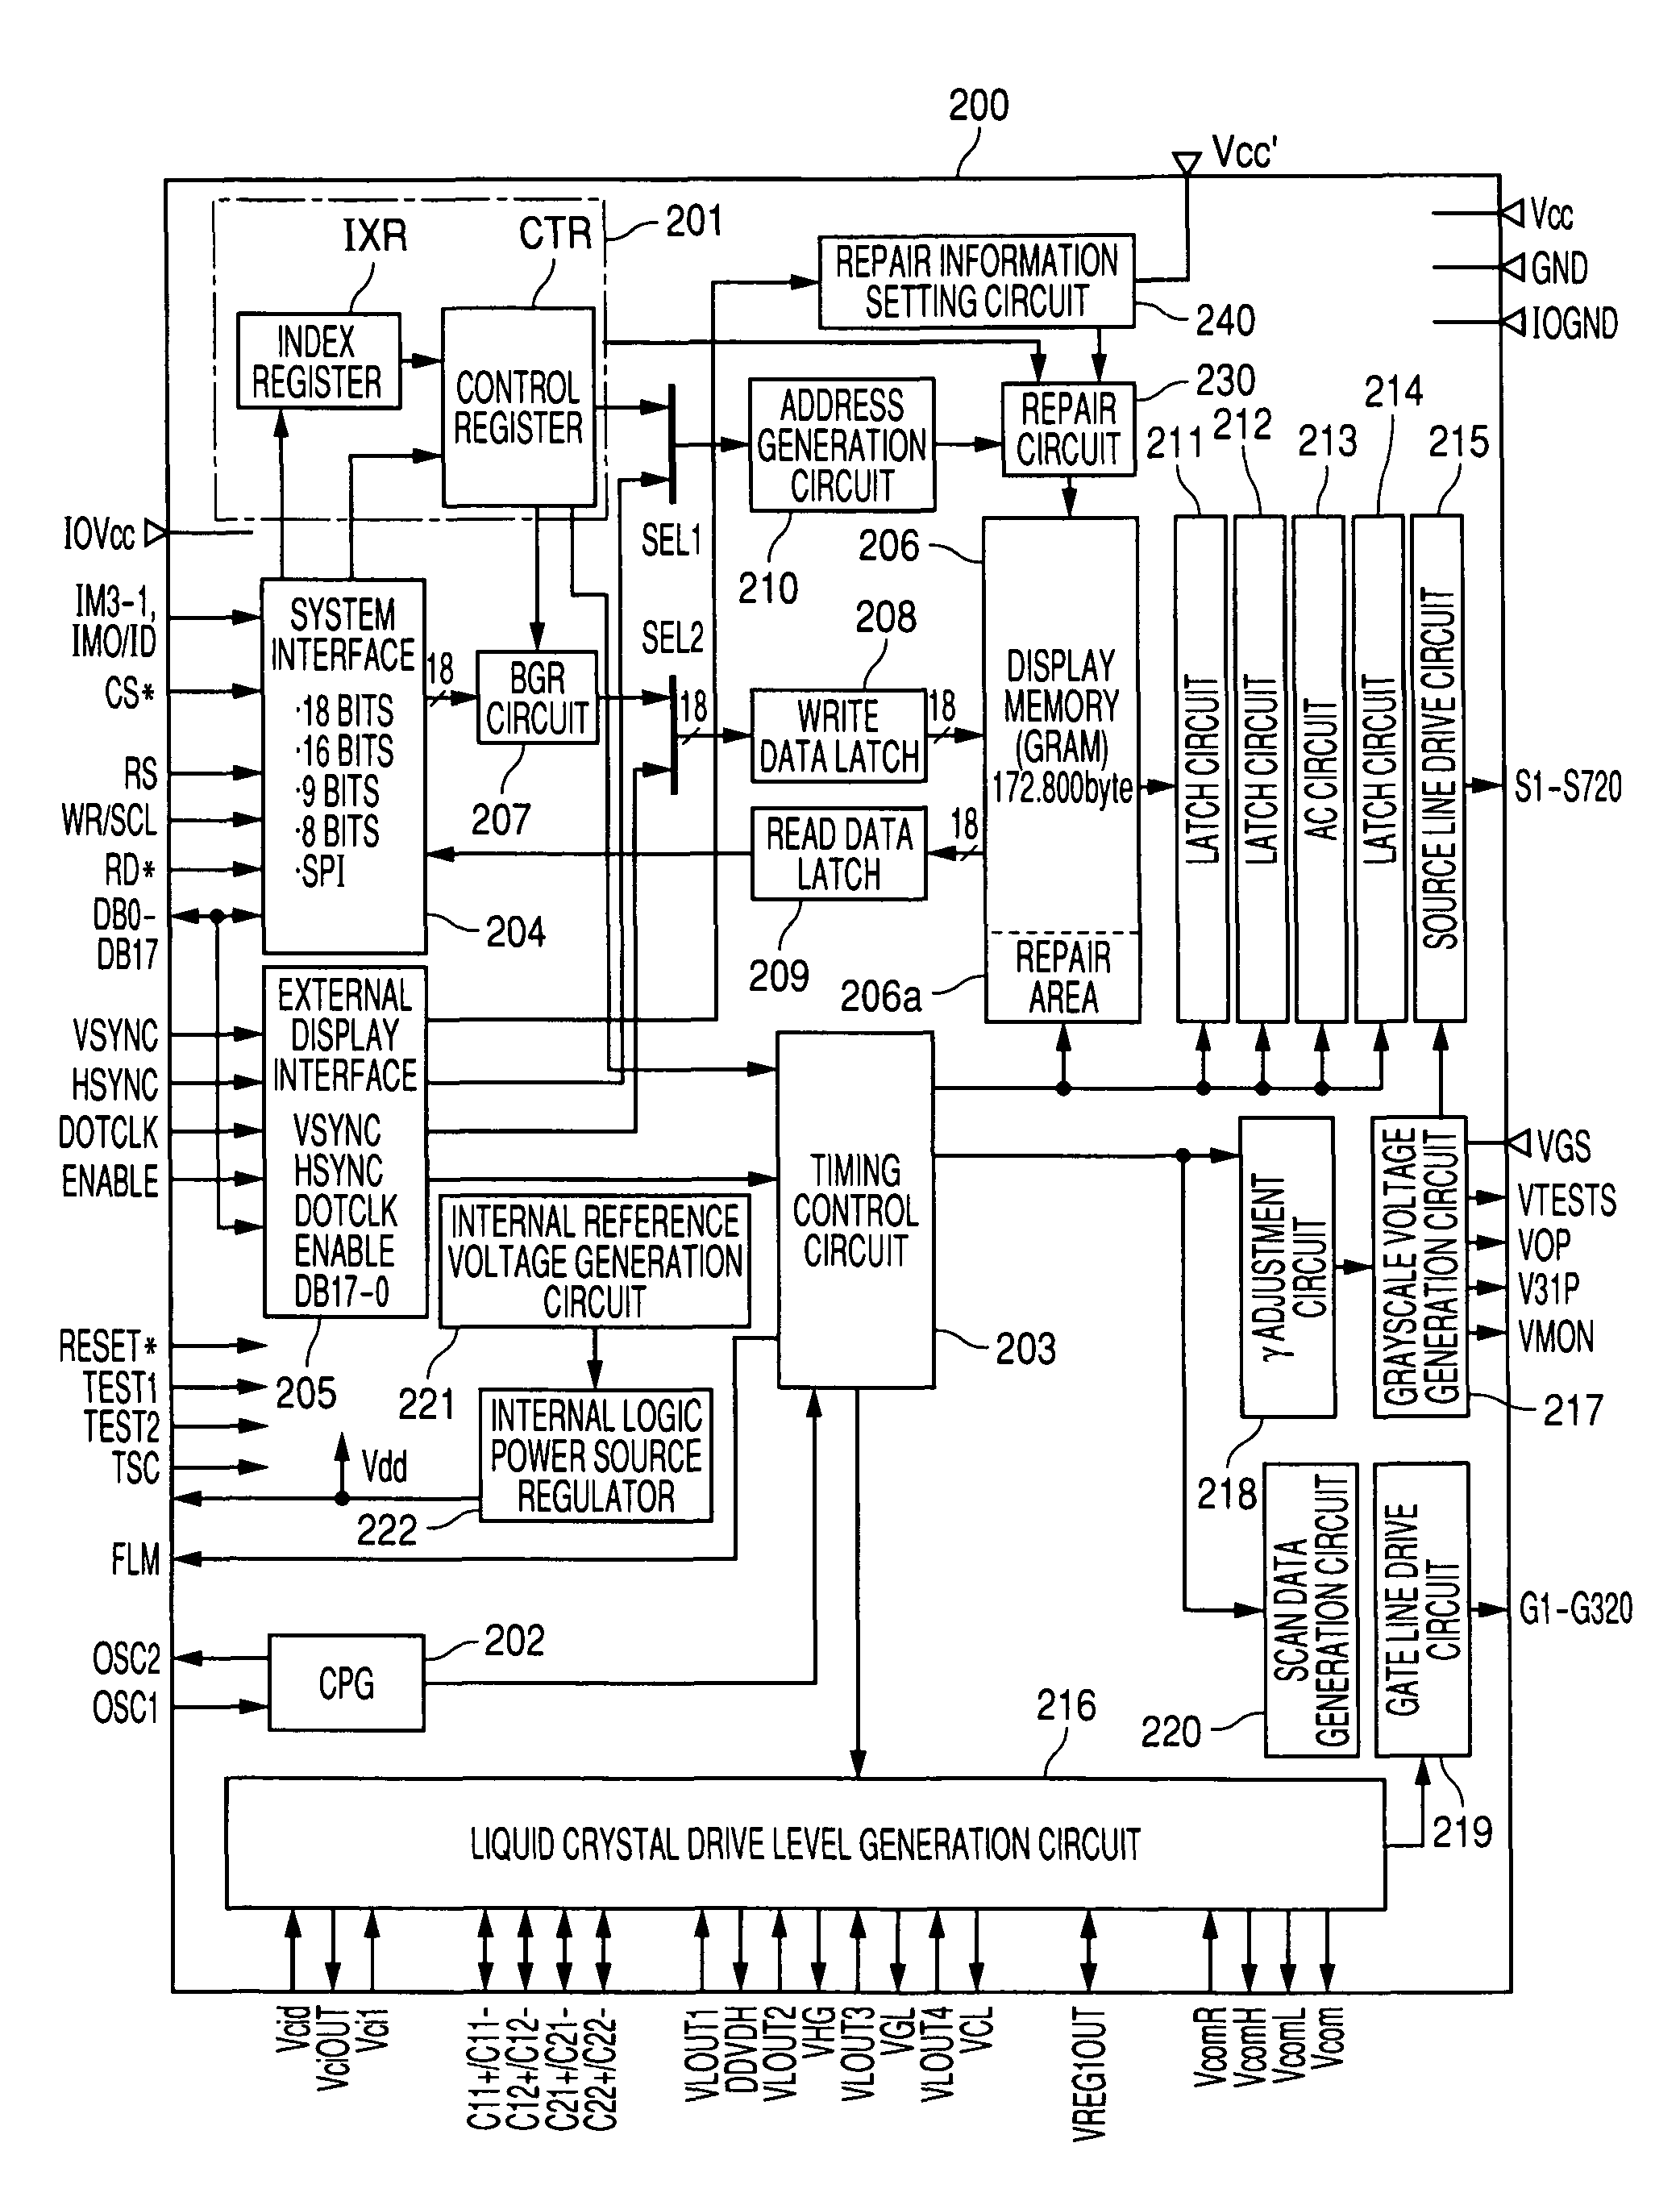 Display control semiconductor integrated circuit